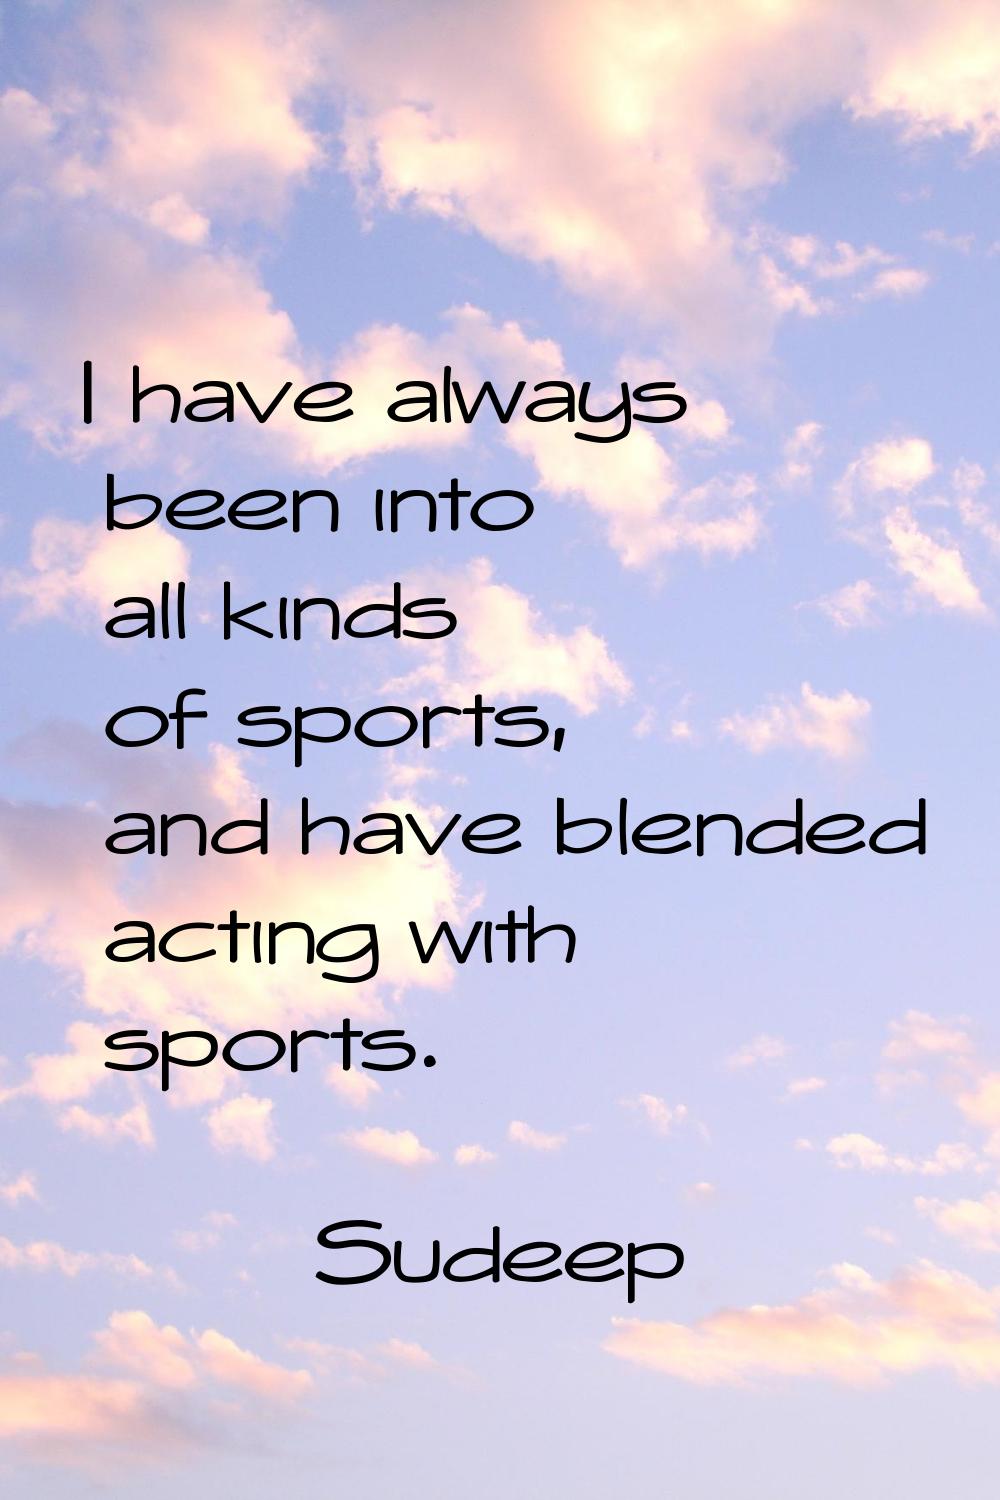 I have always been into all kinds of sports, and have blended acting with sports.